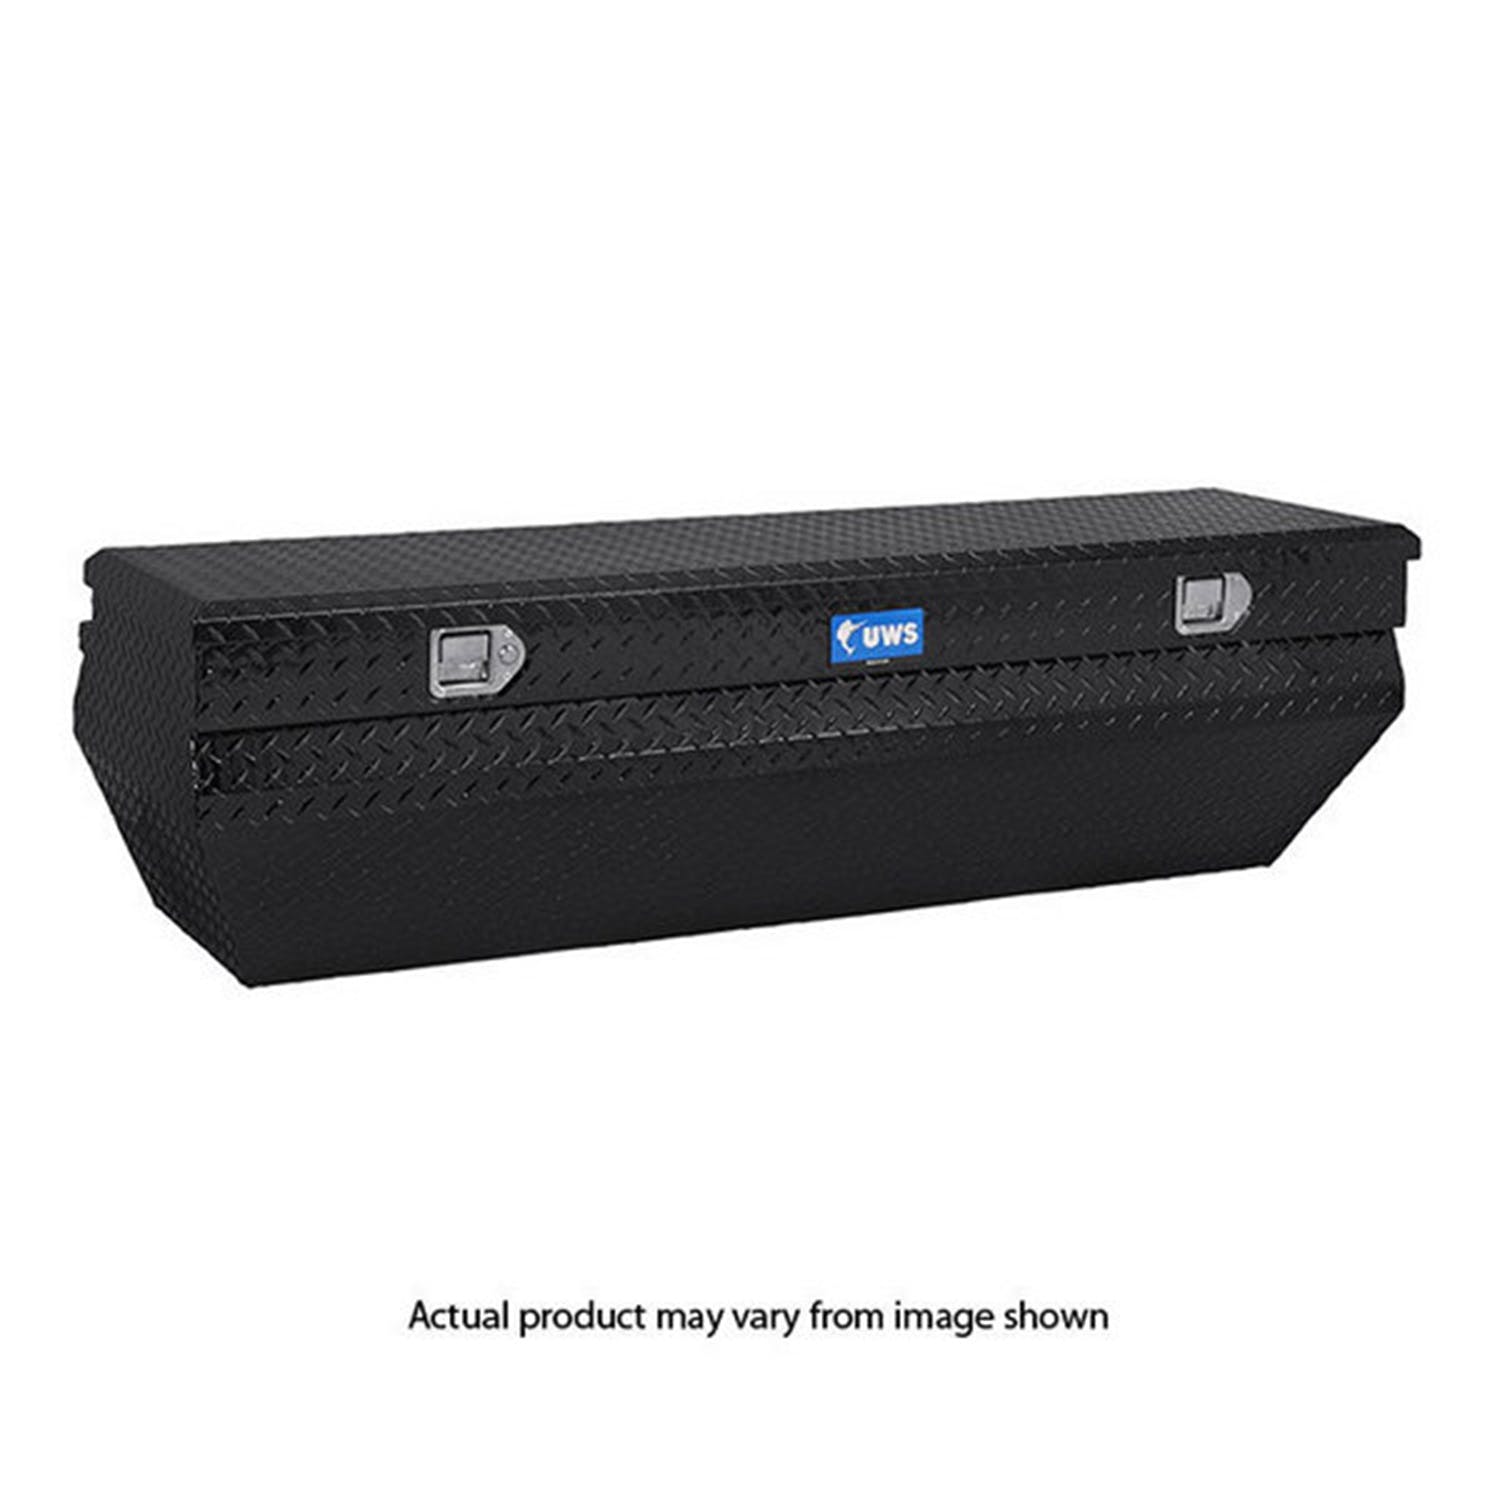 UWS TBC-62-WN-BLK 62 inch Aluminum Chest Box Wedge Notched Black